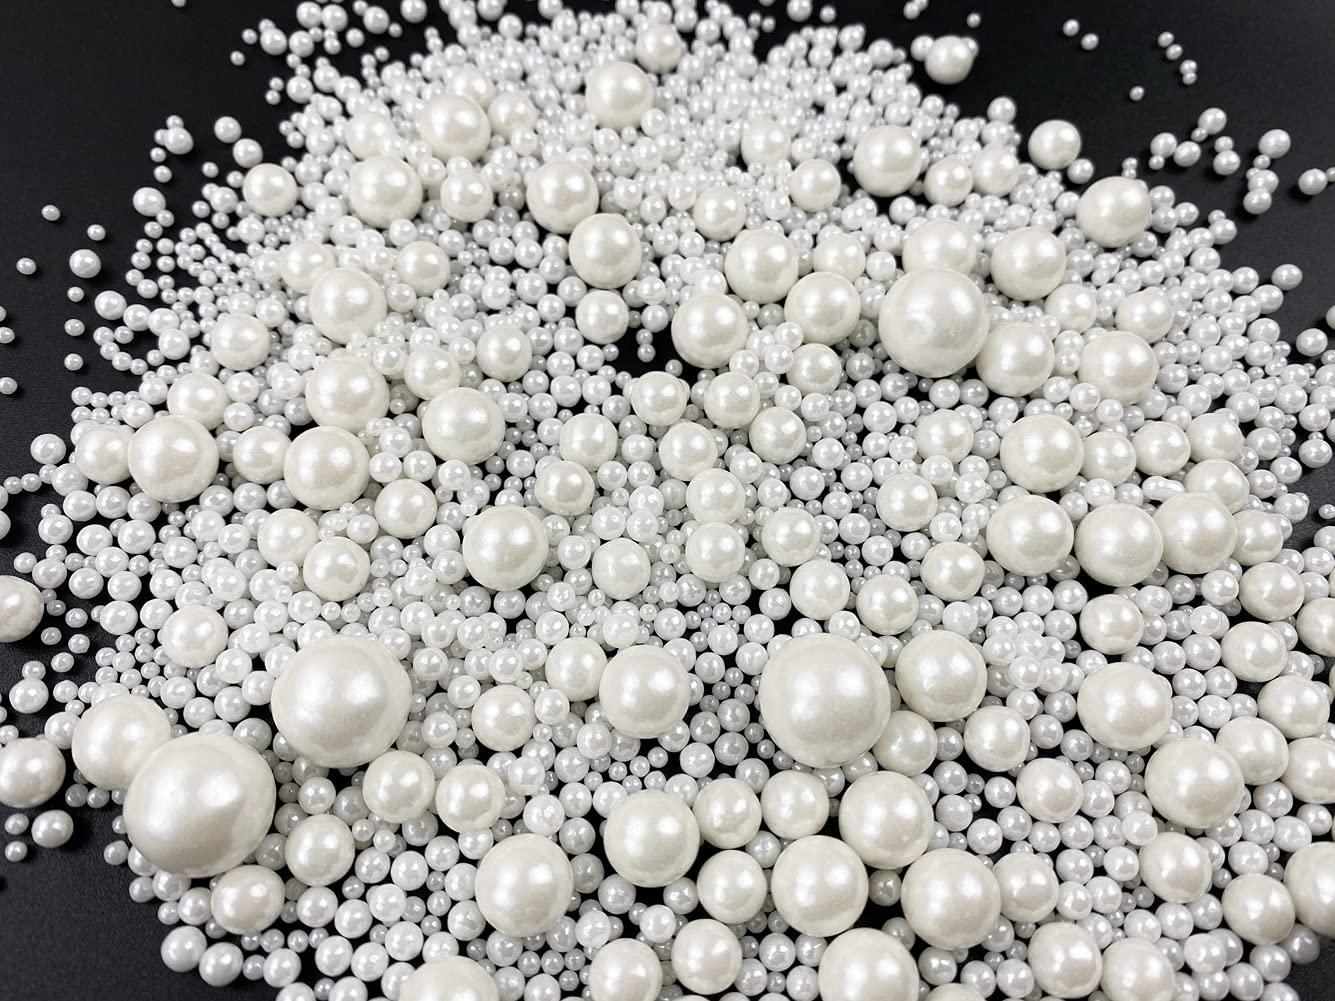 Edible Pearl Sugar Sprinkles White Candy 120g/ 4.2oz Baking Edible Cake  Decorations Cupcake Toppers Cookie Decorating Ice Cream Toppings  Celebrations Shaker Jar Wedding Shower Party Chirstmas Supplies A white